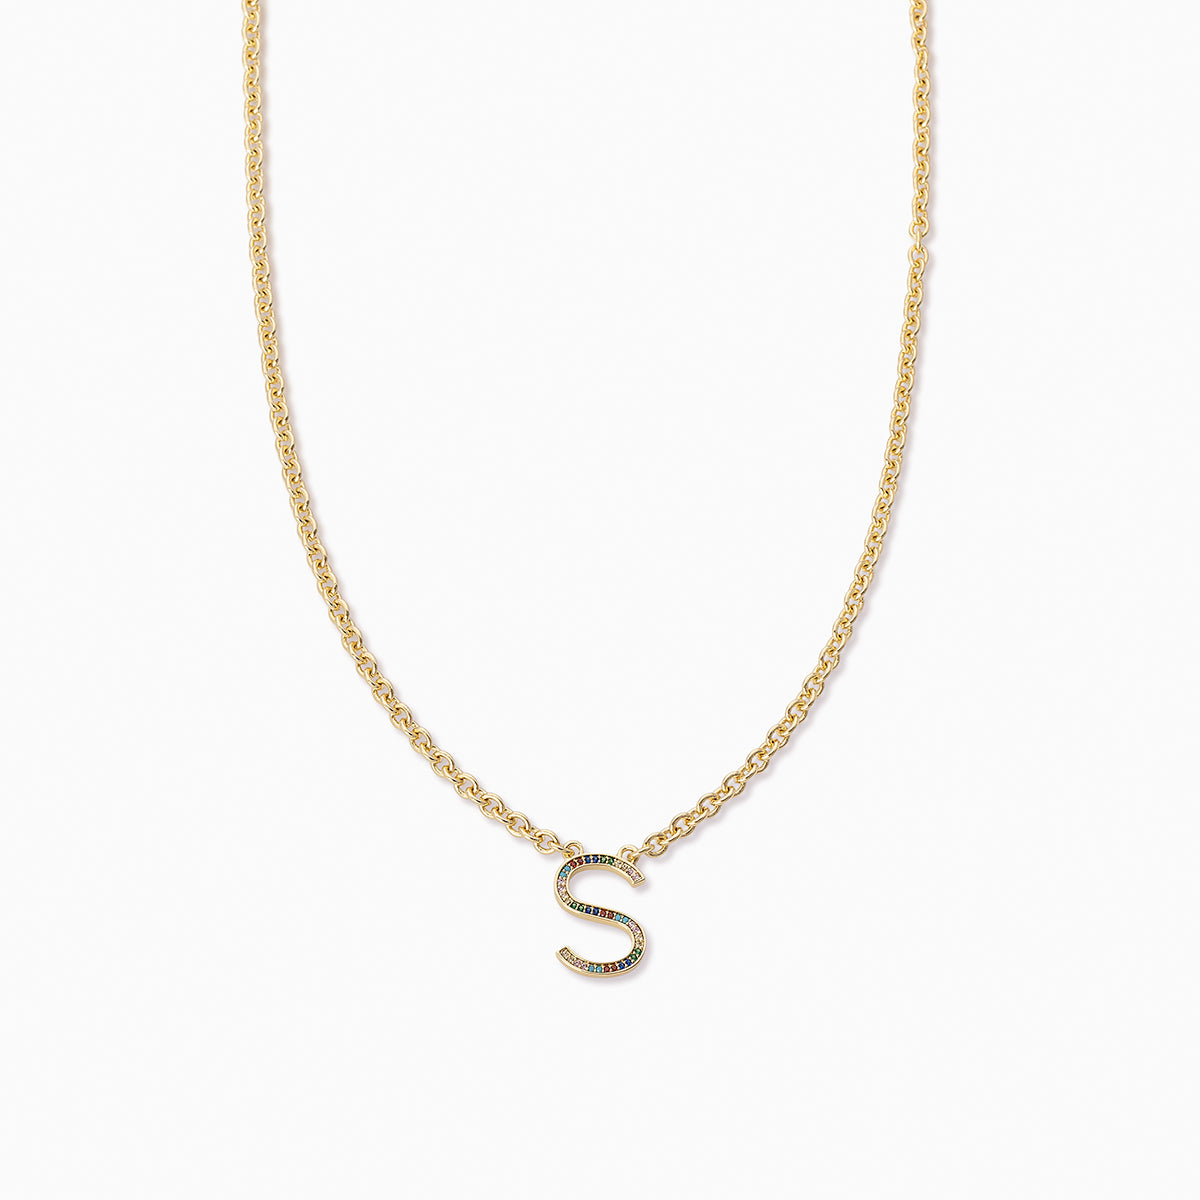 Know Me Necklace | Gold S | Product Image | Uncommon James